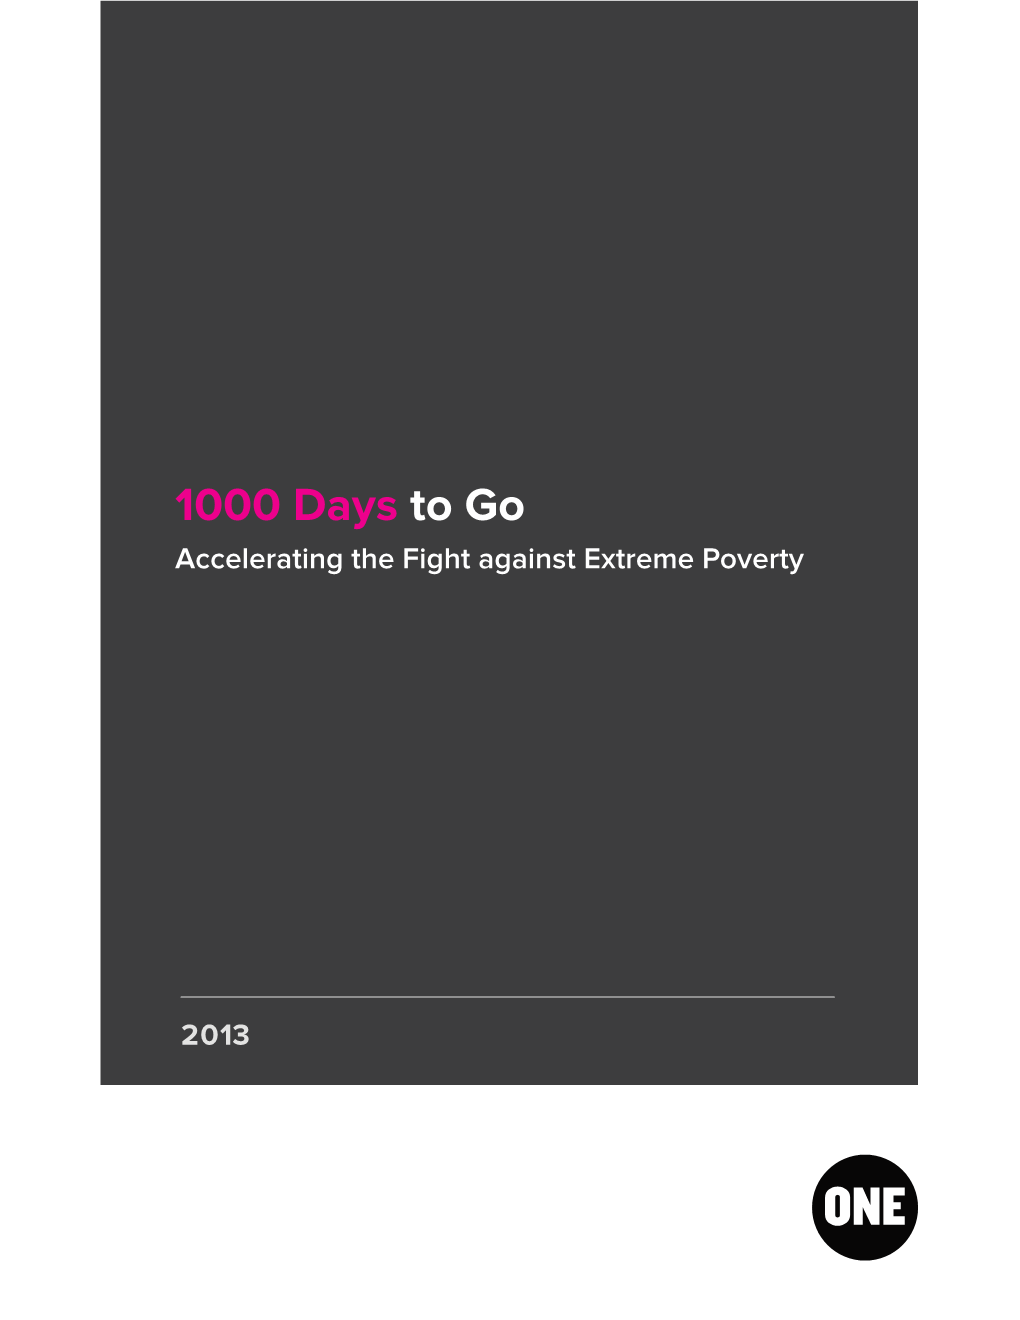 1000 Days to Go Accelerating the Fight Against Extreme Poverty